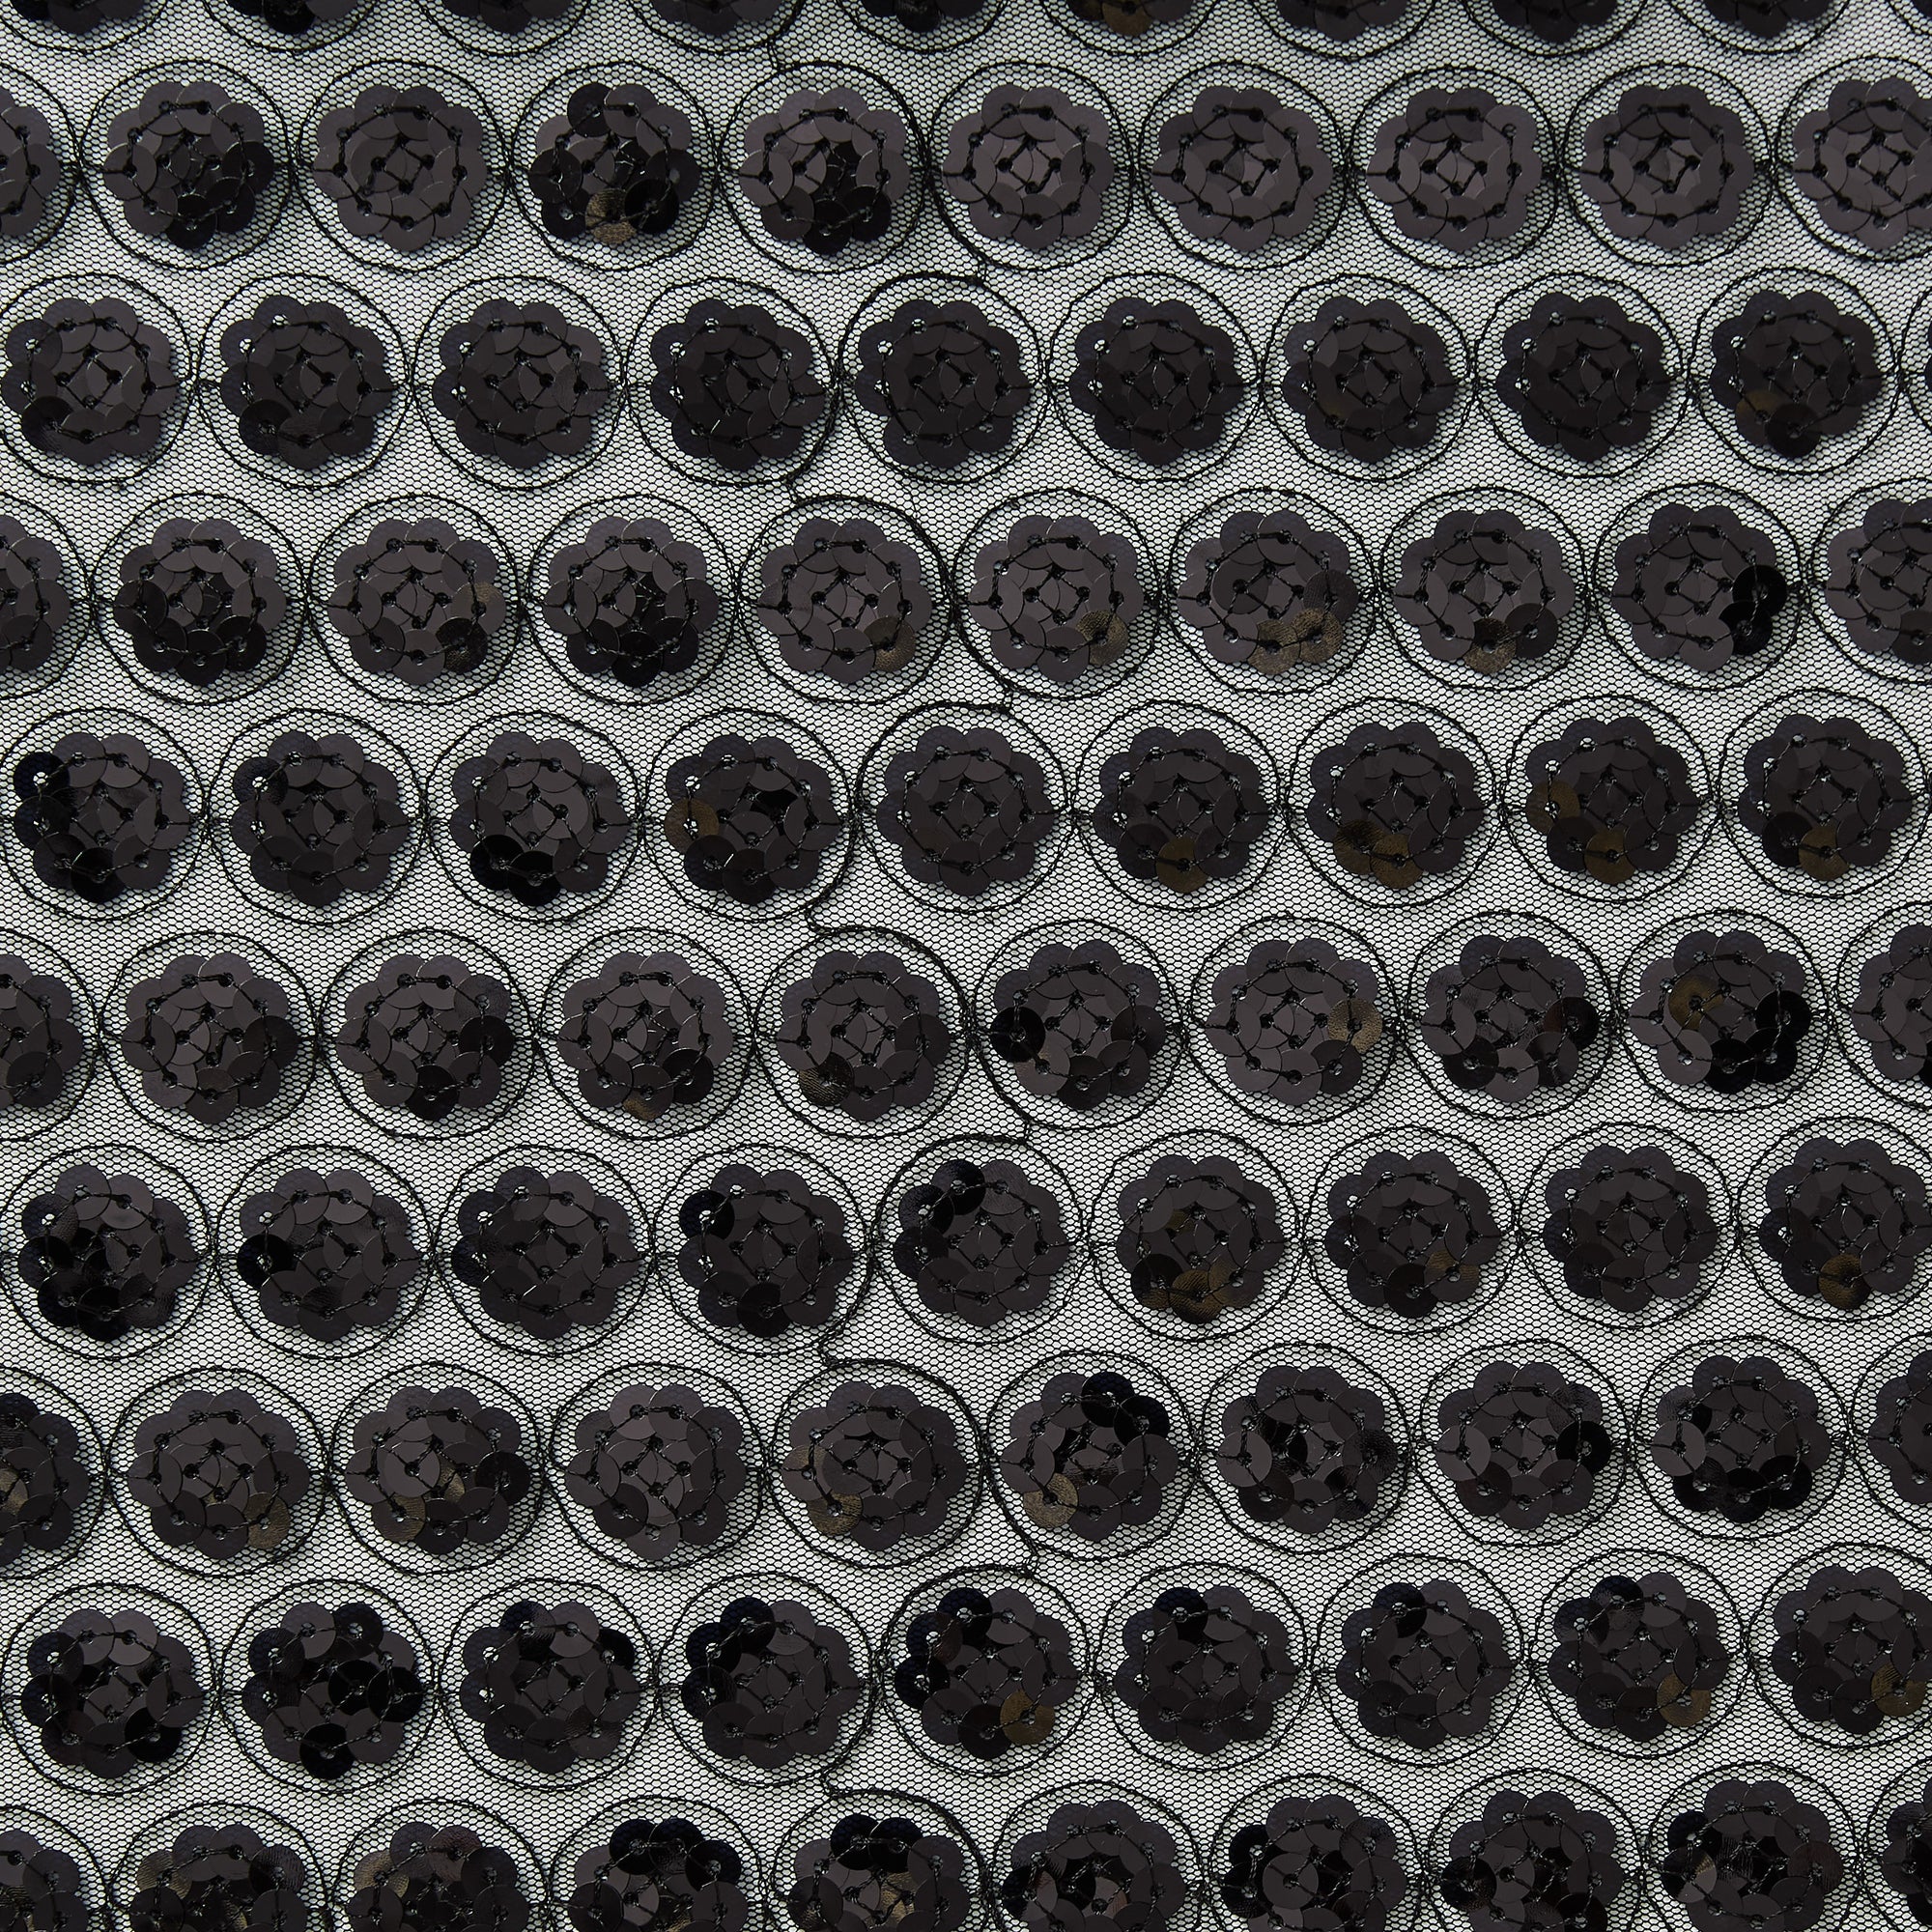 Illustrating vegas a black colored Sequinned embroidery in regurlar spots on a sheer black polyester mesh  base